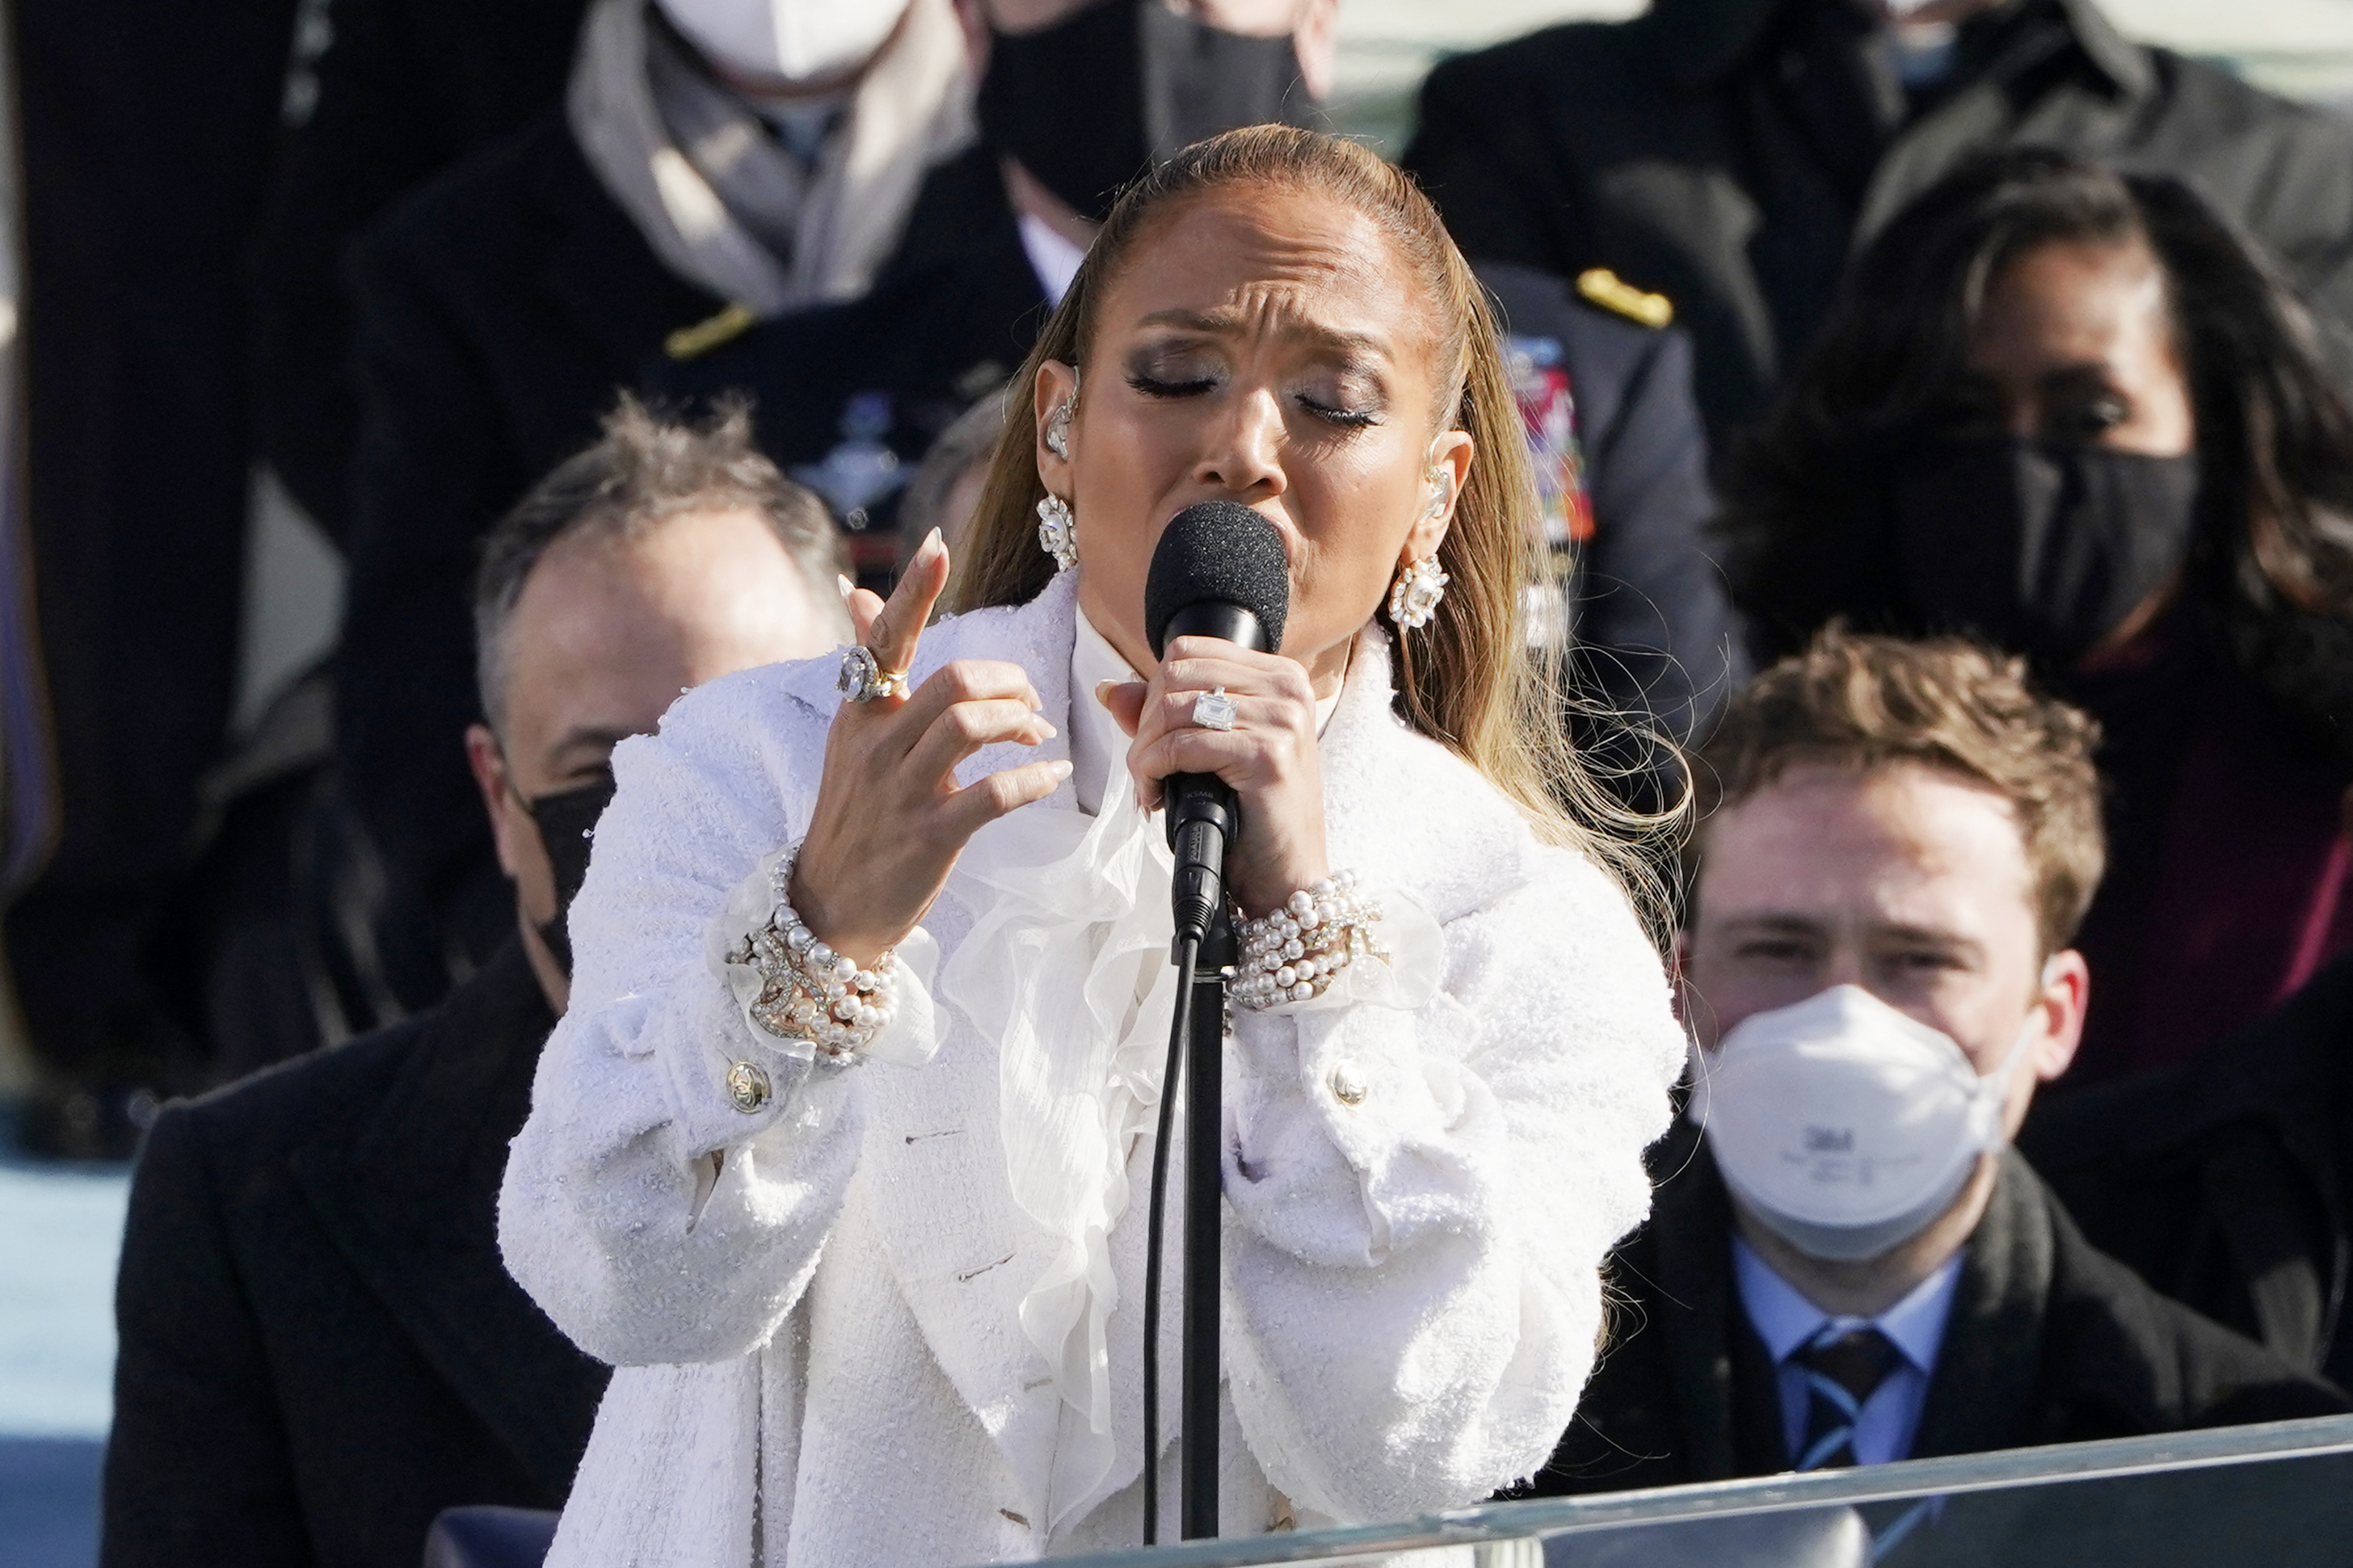 j.lo singing at the white house